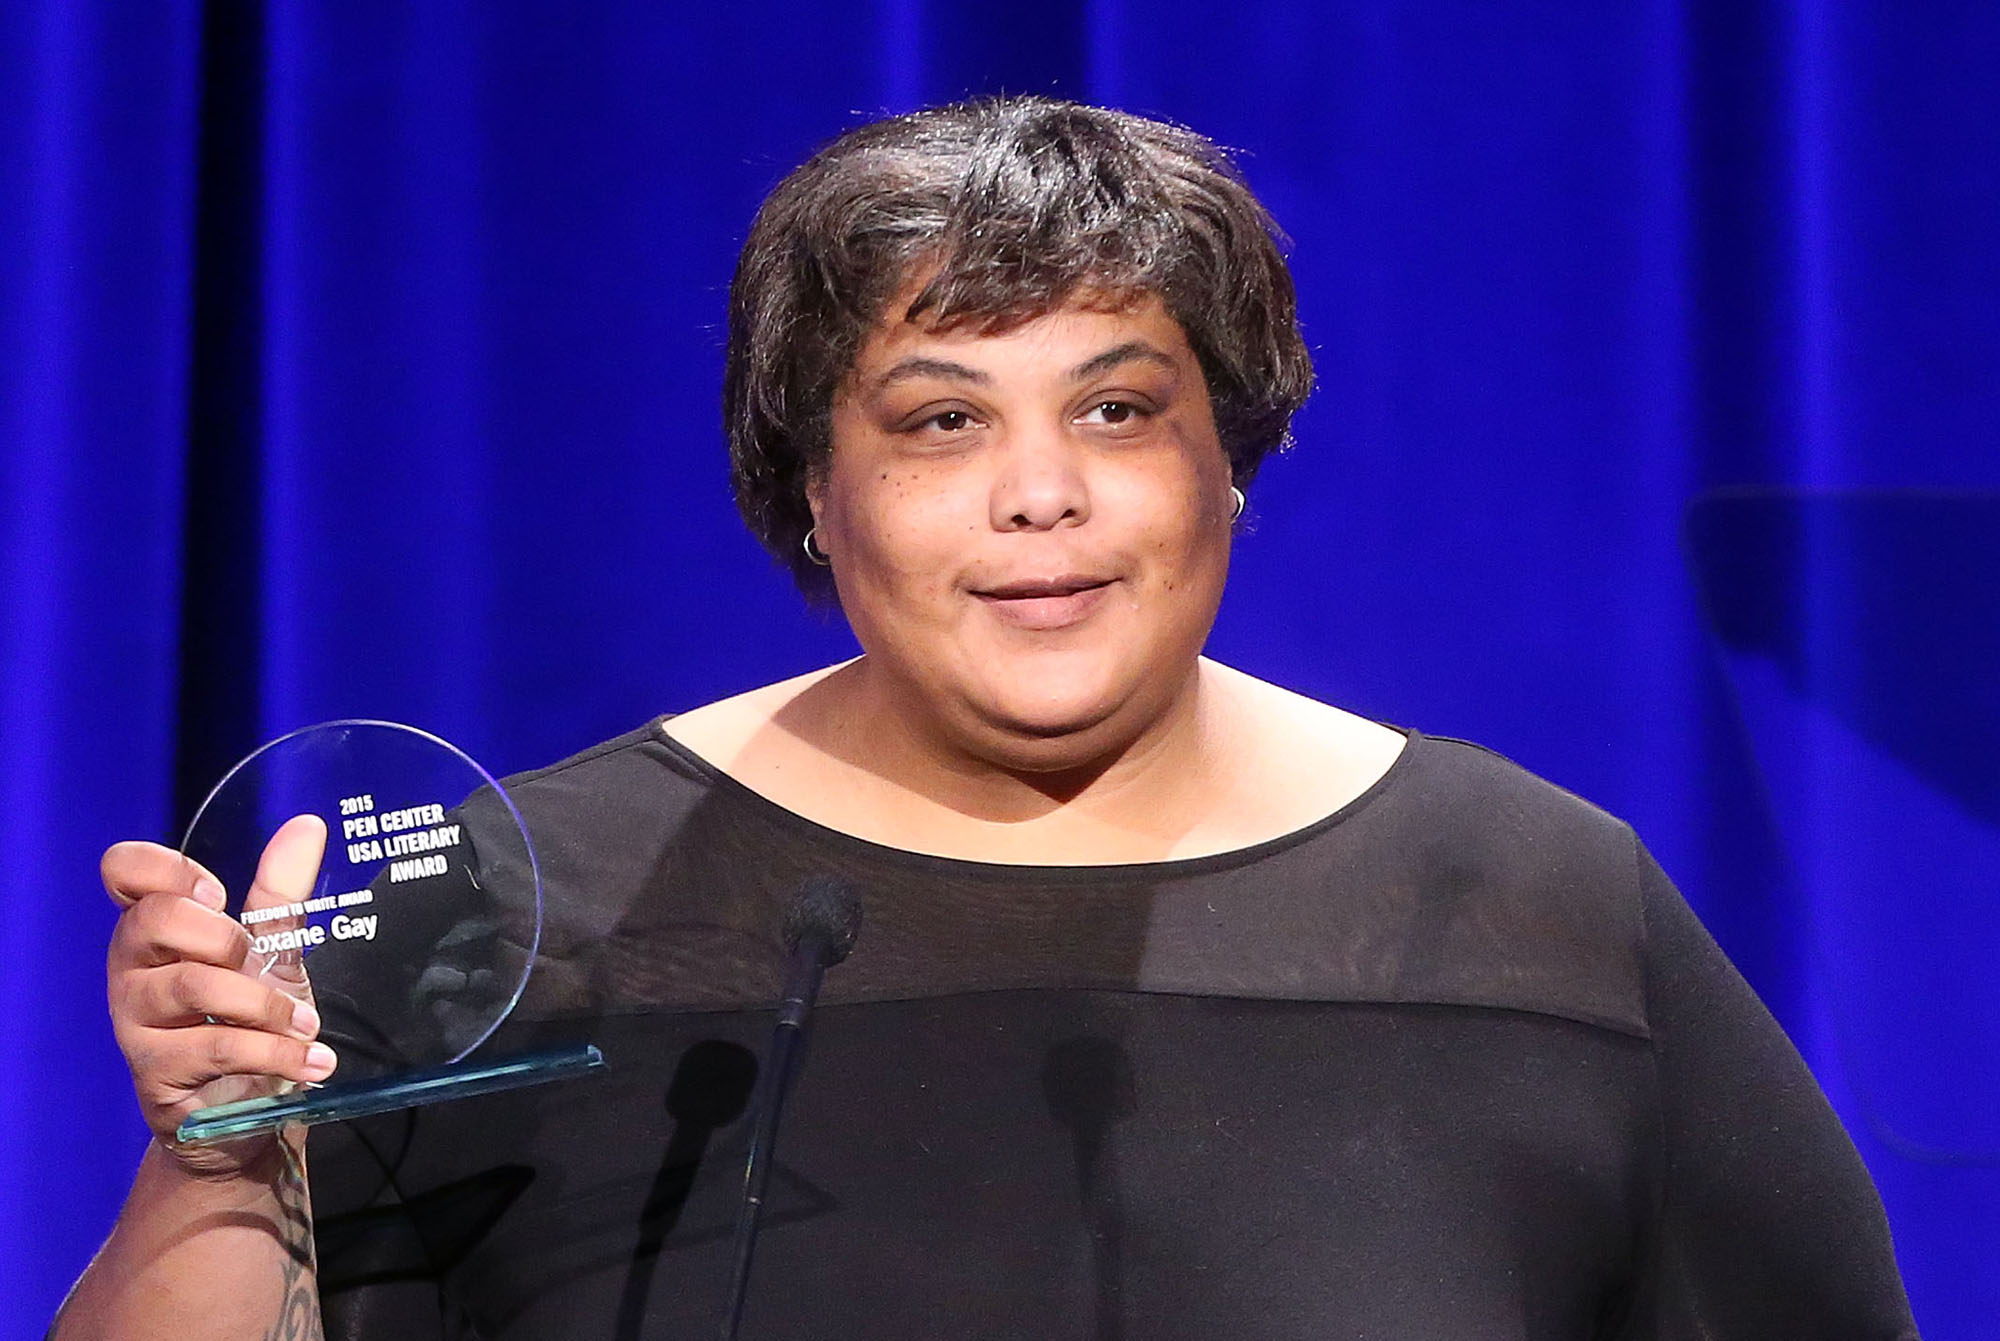 Roxane Gay is honored with the Freedom to Write Award during the PEN Center USA's 25th Annual Literary Awards Festival at the Beverly Wilshire Four Seasons Hotel on November 16, 2015 in Beverly Hills, California.  (Photo by Frederick M. Brown/Getty Images) (Frederick M. Brown—Getty Images)